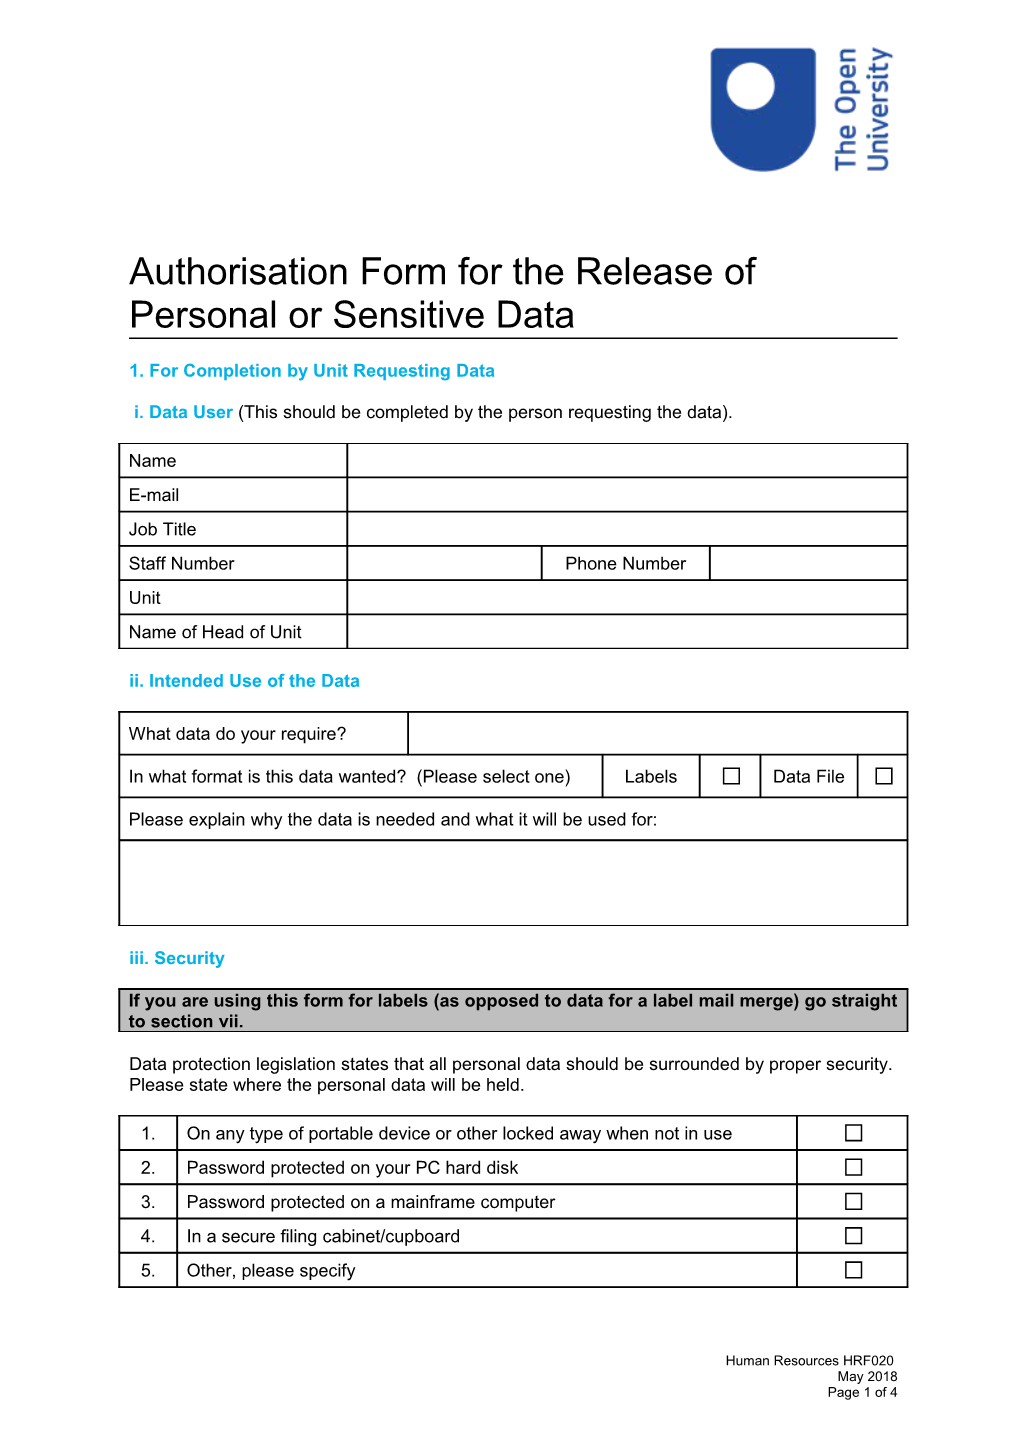 Autorisation Form for the Release of Personal Or Sensitive Data HRF020